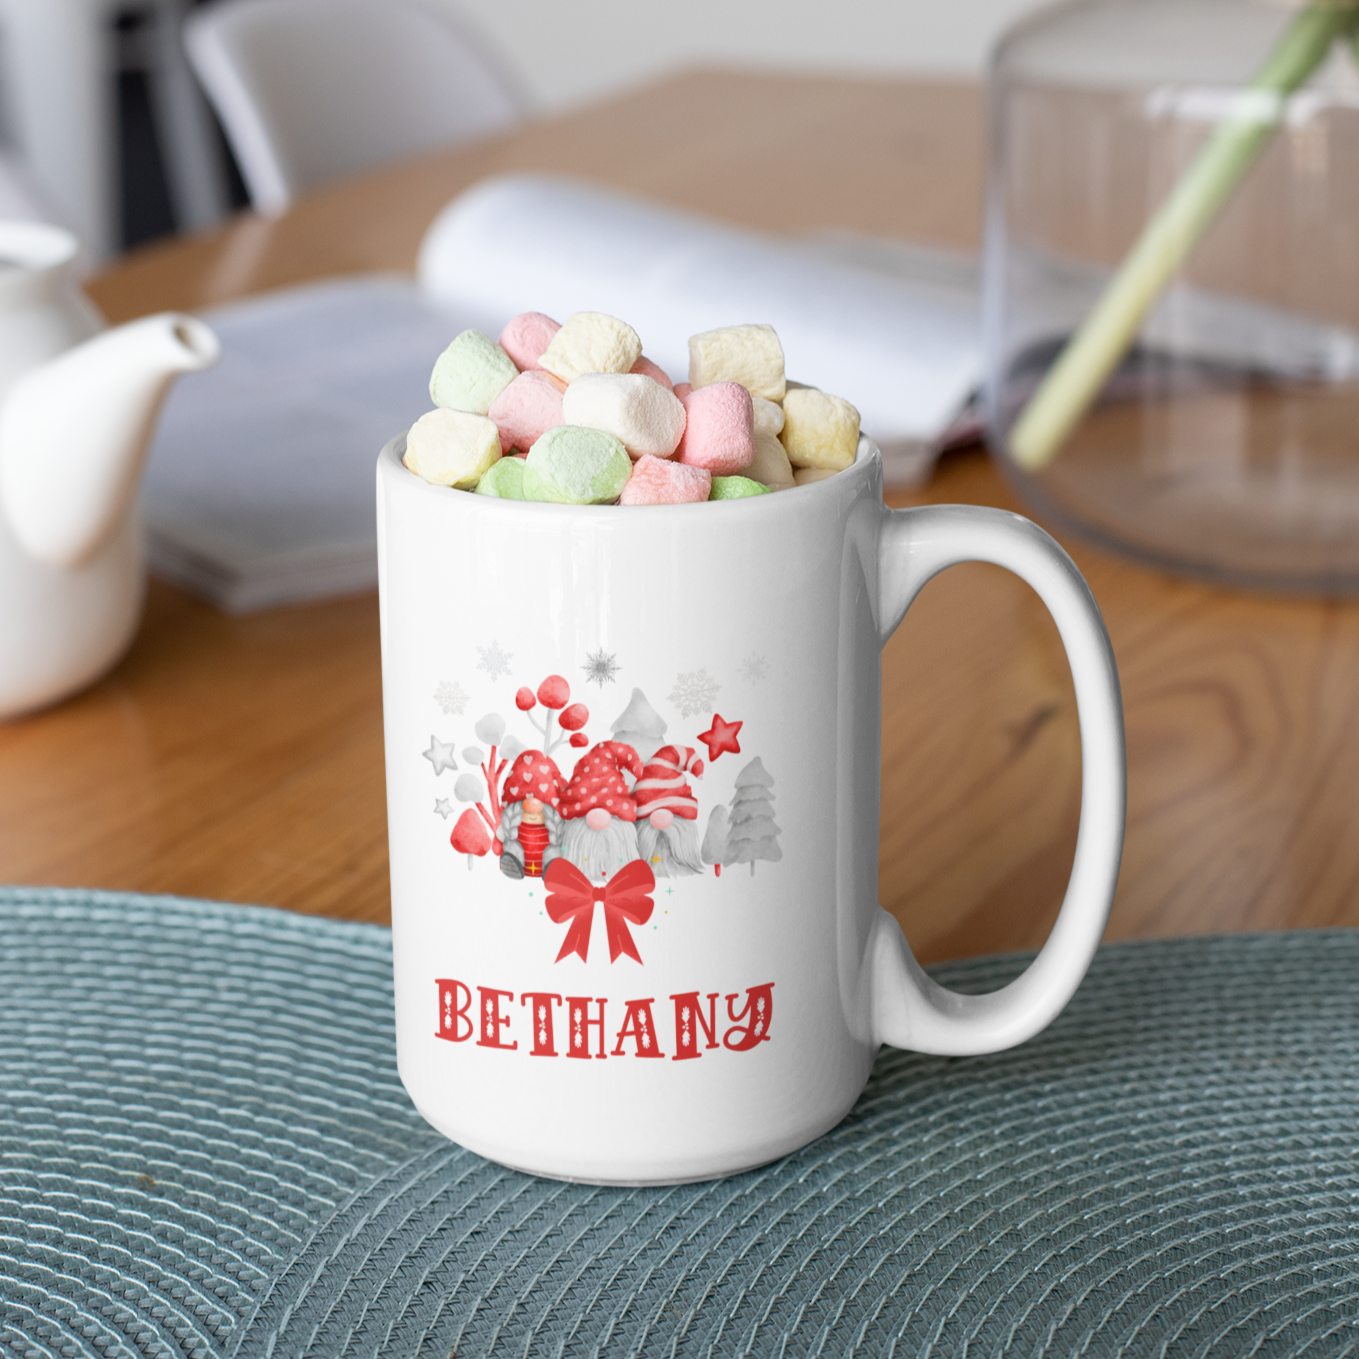 Large Christmas gnome mug. Savour your hot cocoa with a unique touch! Our personalised Gnome Christmas mug is a classic holiday design with your name, for a whimsical, festive feel. Enjoy your favourite drink with a special touch!